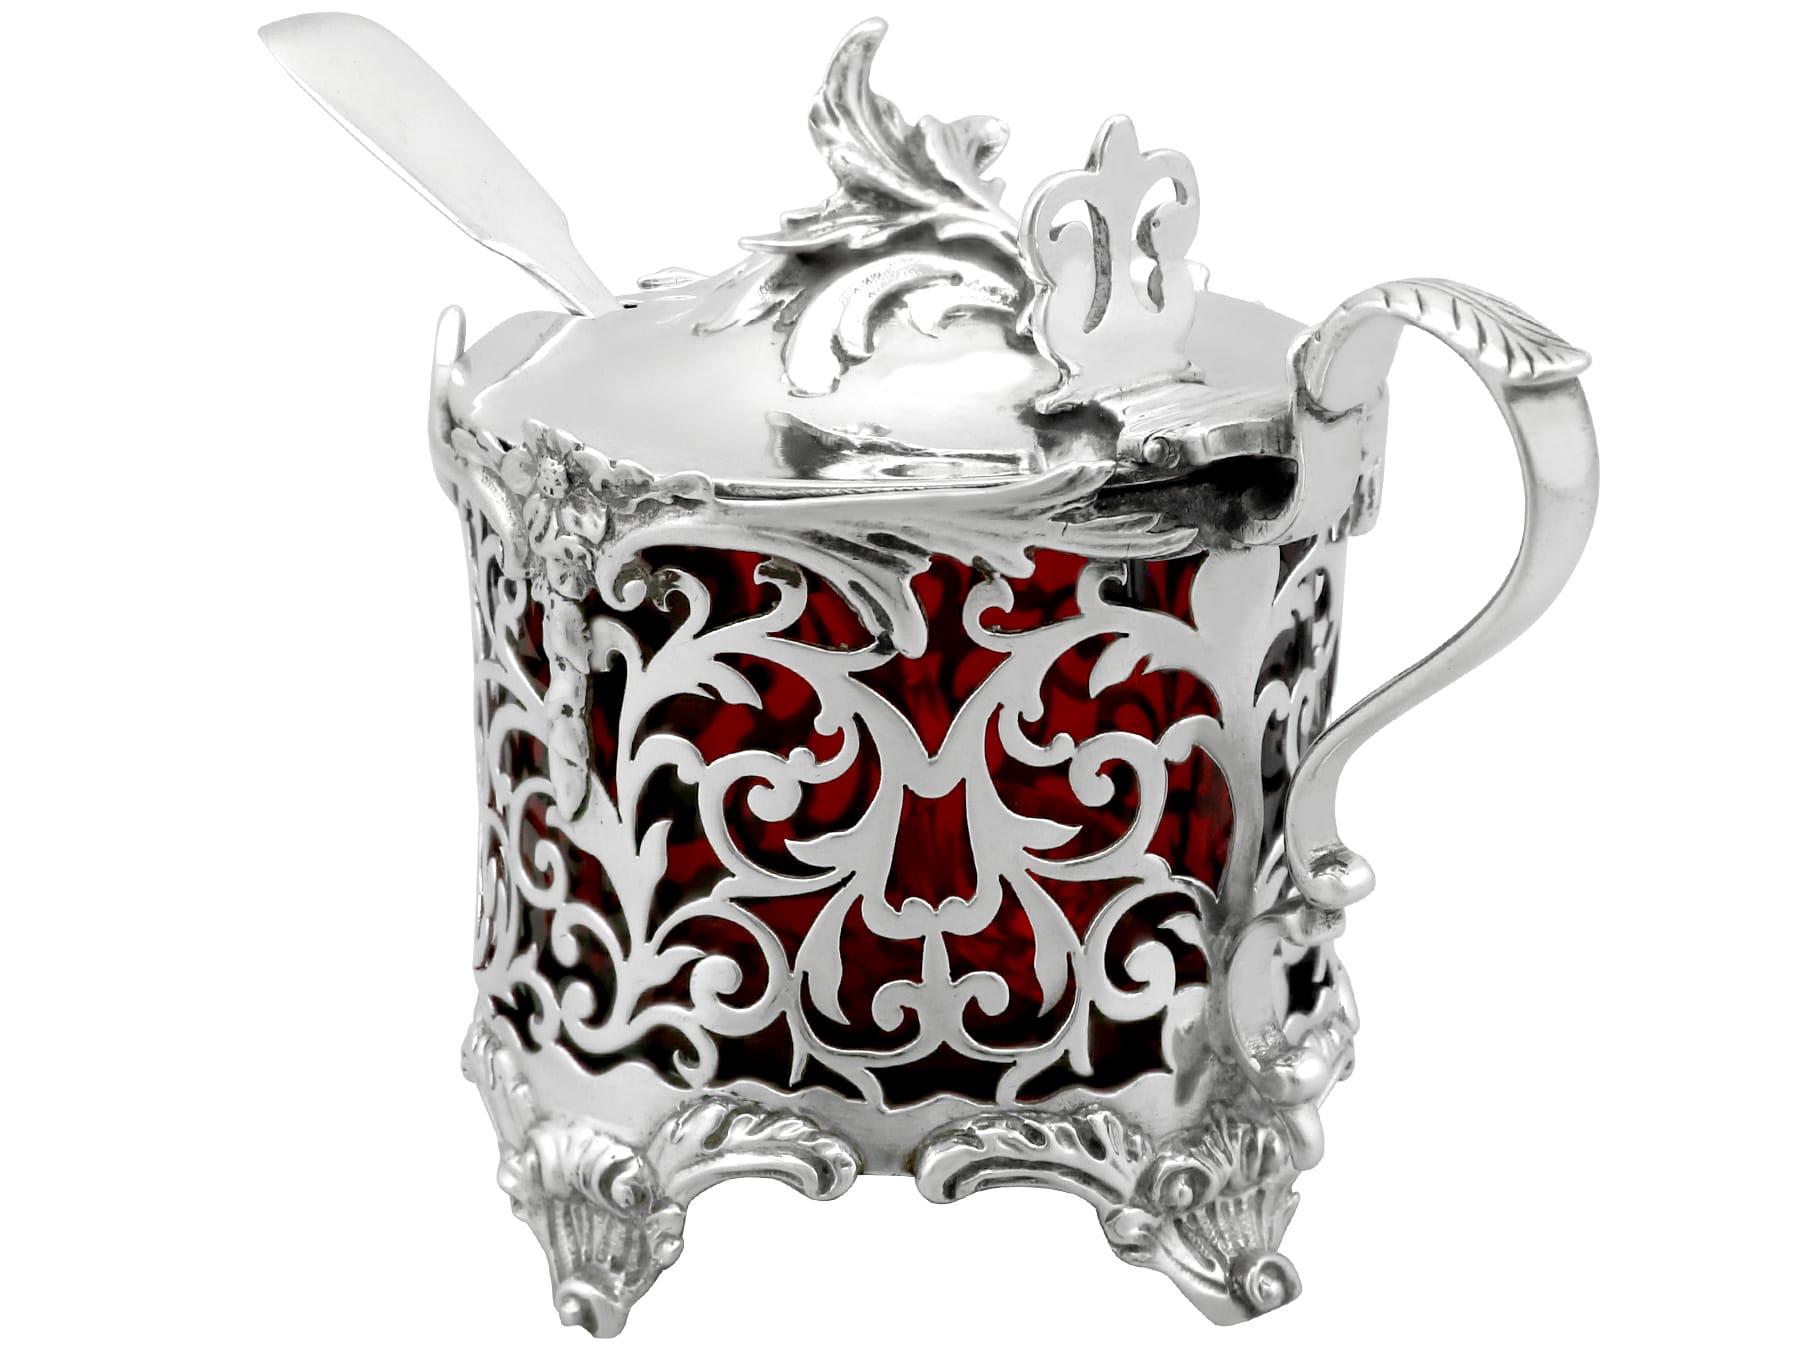 Antique Victorian Sterling Silver Mustard Pot (1884) In Excellent Condition For Sale In Jesmond, Newcastle Upon Tyne